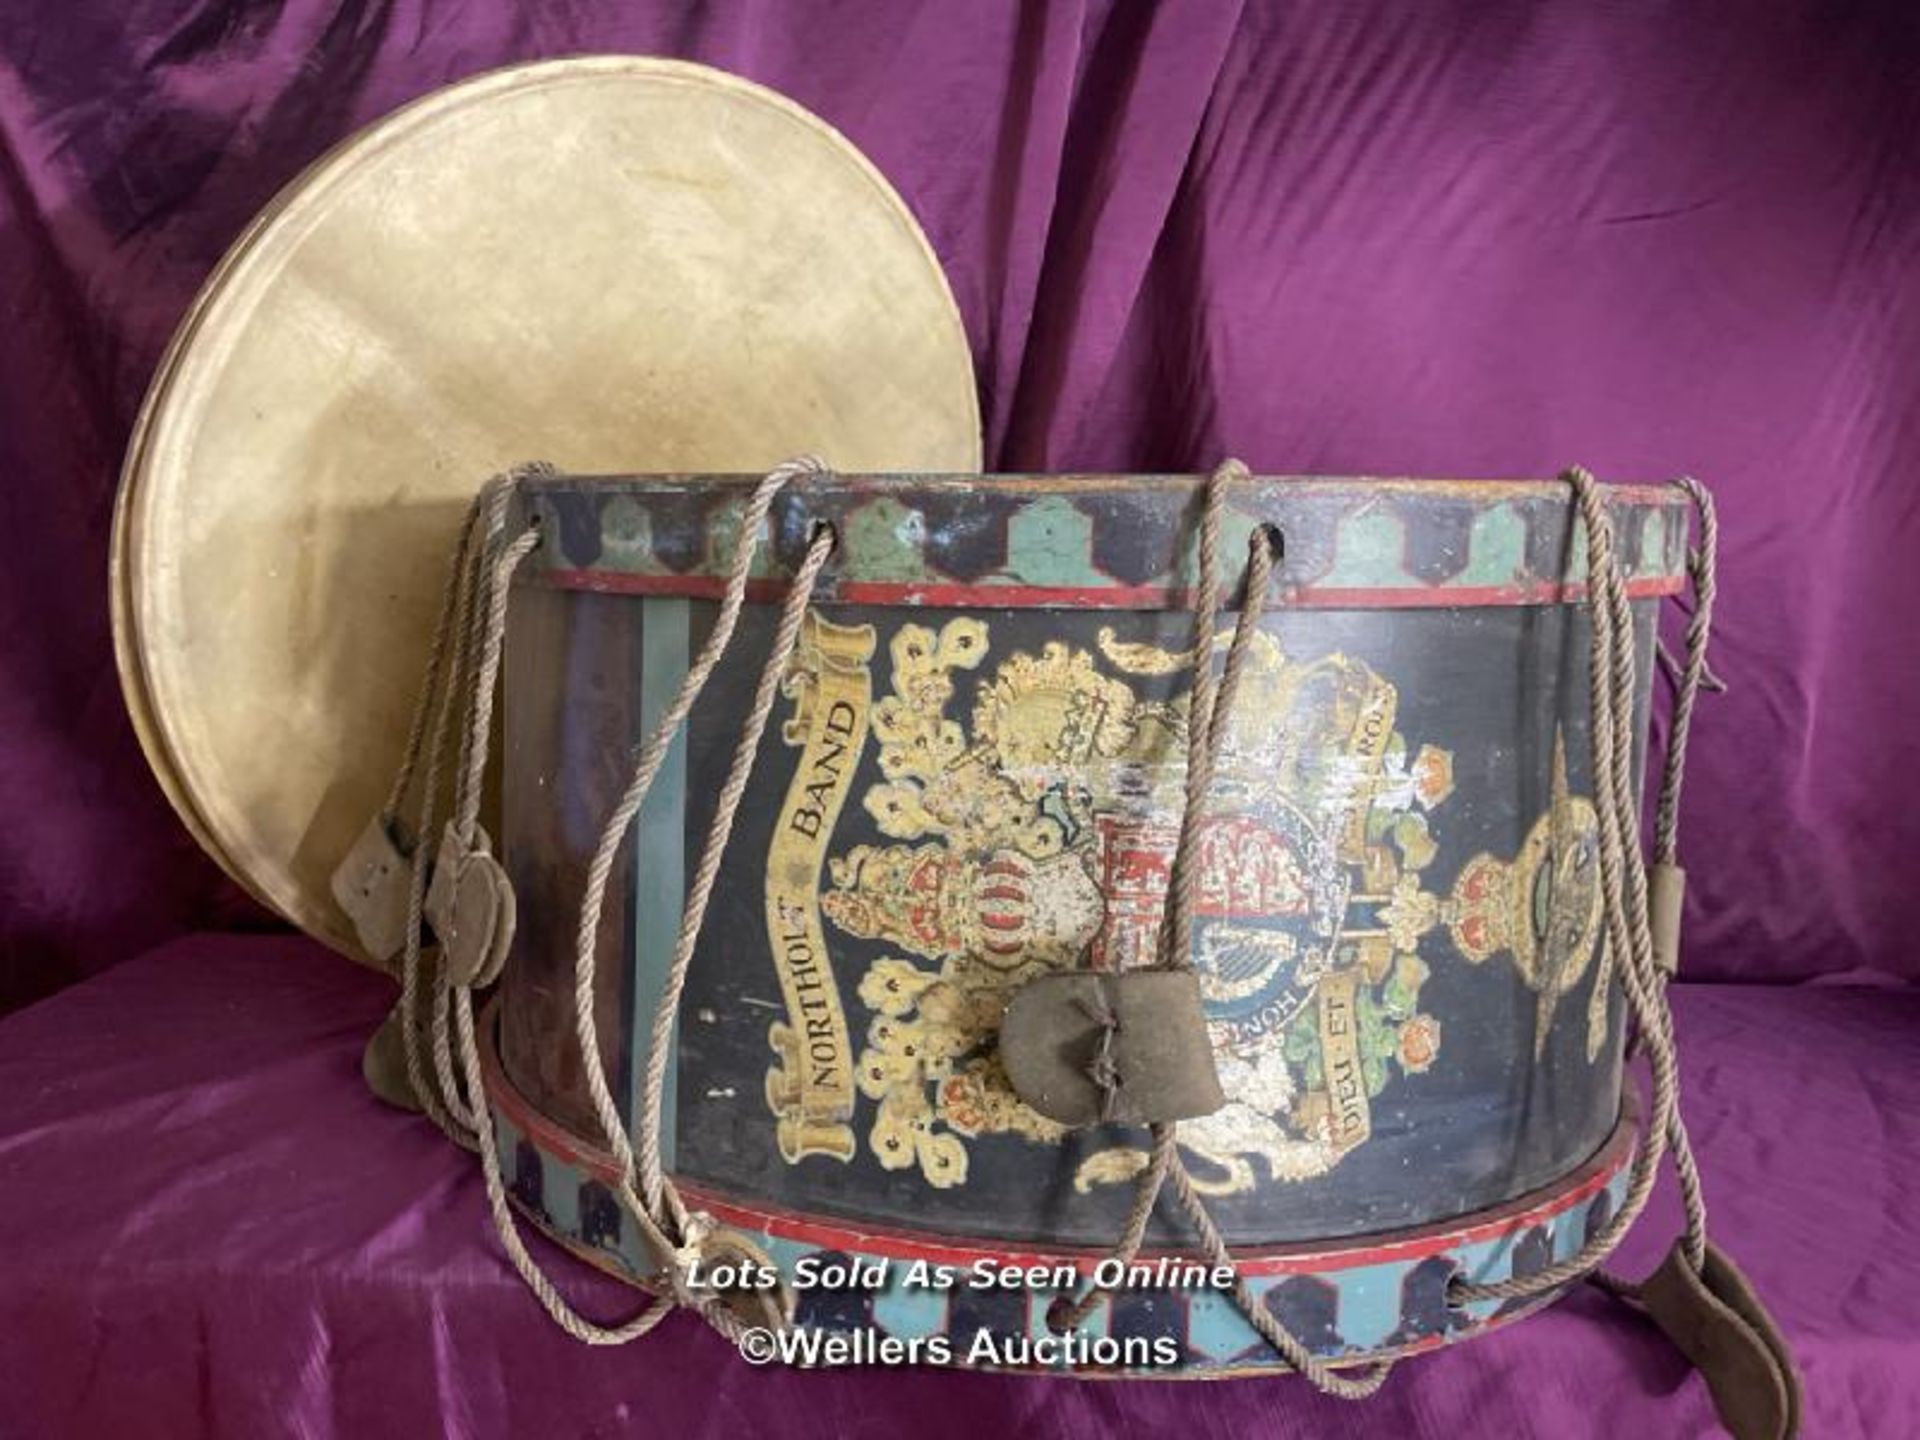 PRE-WAR BASE DRUM TO ROYAL AIRFORCE NORTHOLT BAND, COMPLETE WITH SKINS AND ROPES, DIAMETER 67CM X